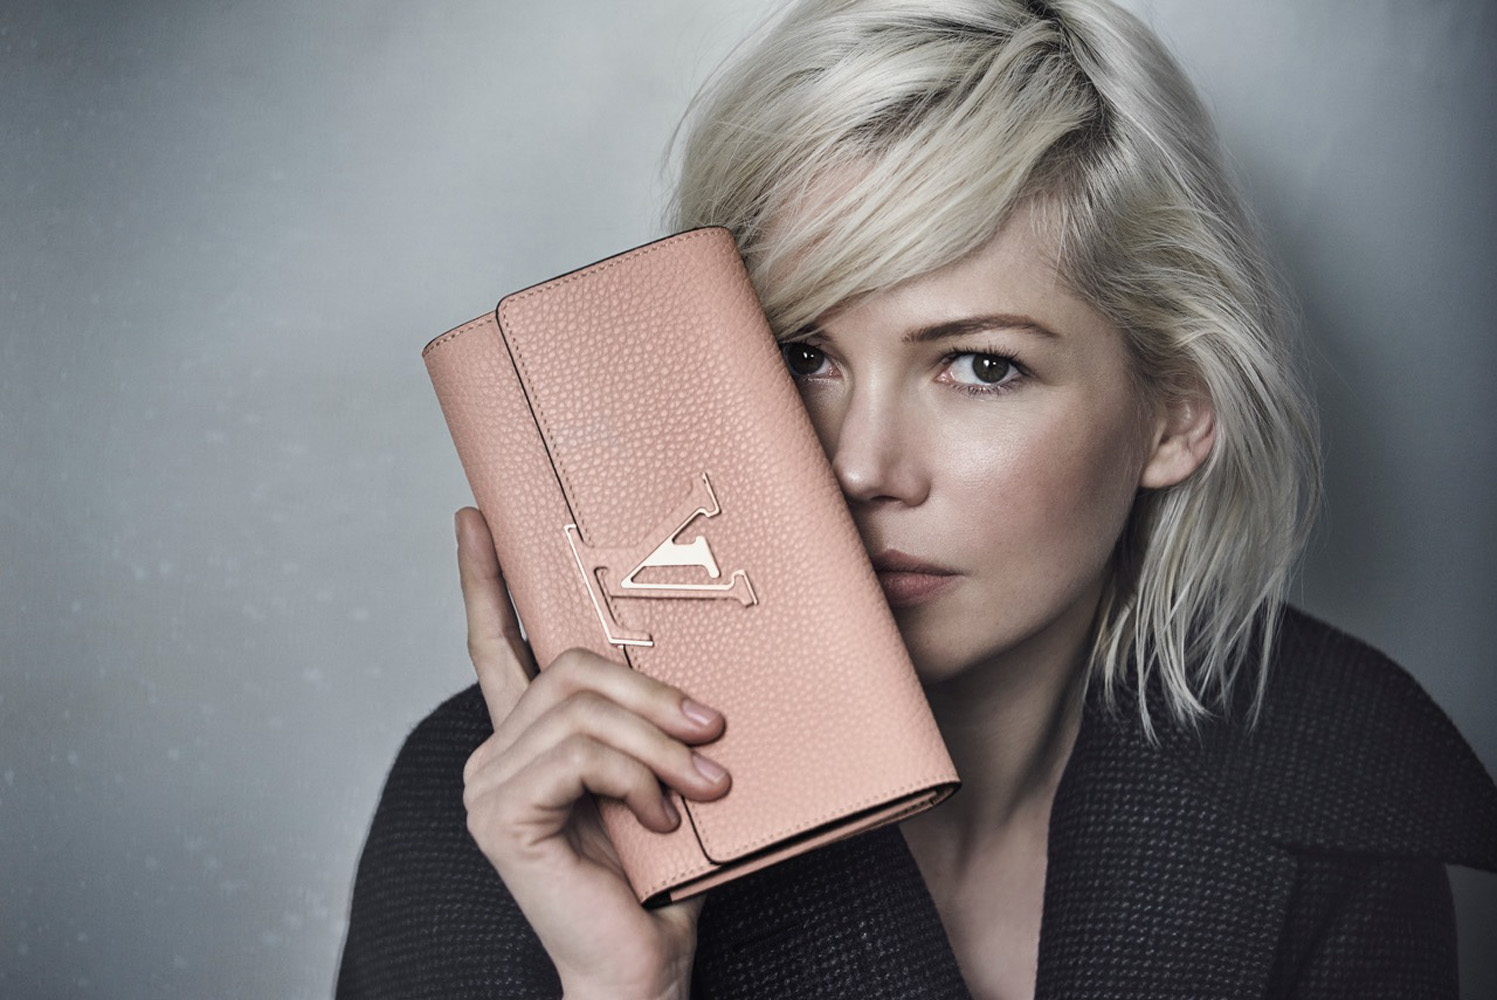 MICHELLE WILLIAMS ADVERTISING CAMPAIGN - News